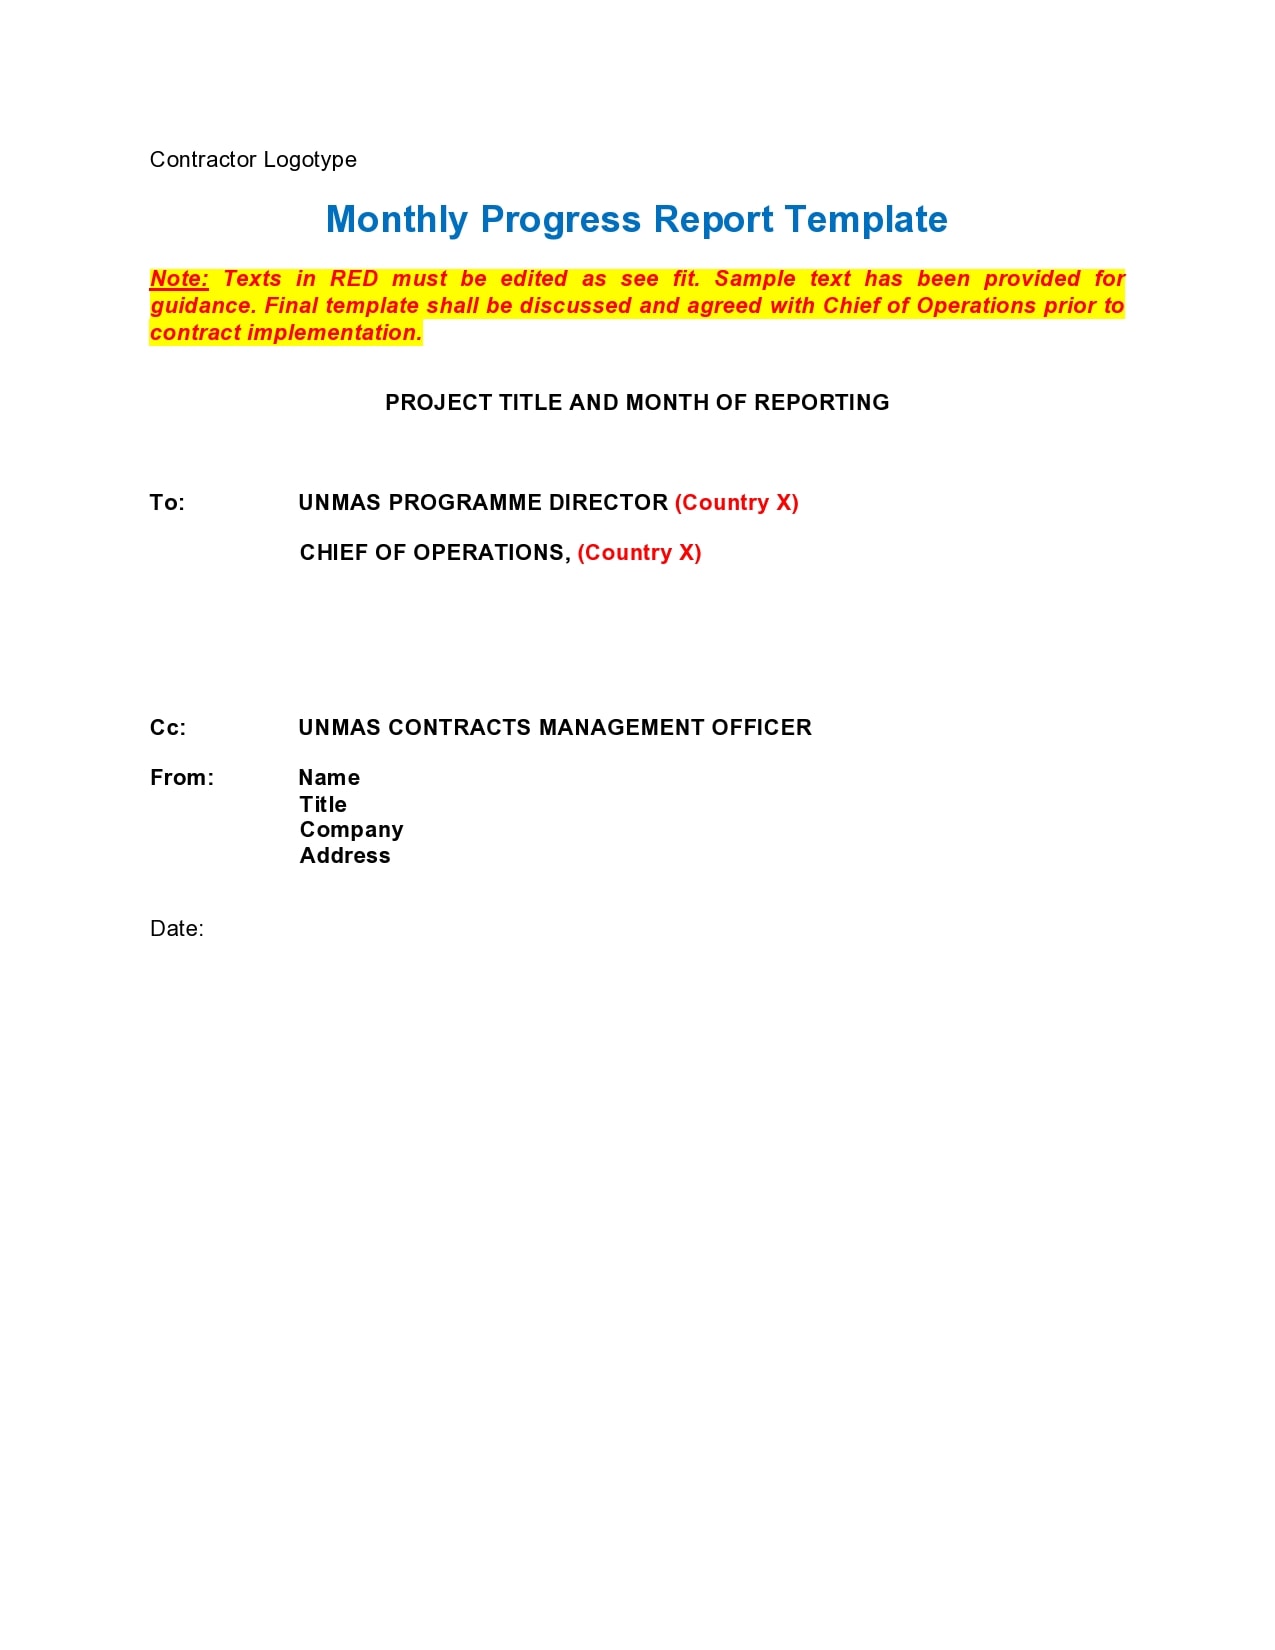 22 Professional Progress Report Templates (Free) - TemplateArchive With Implementation Report Template